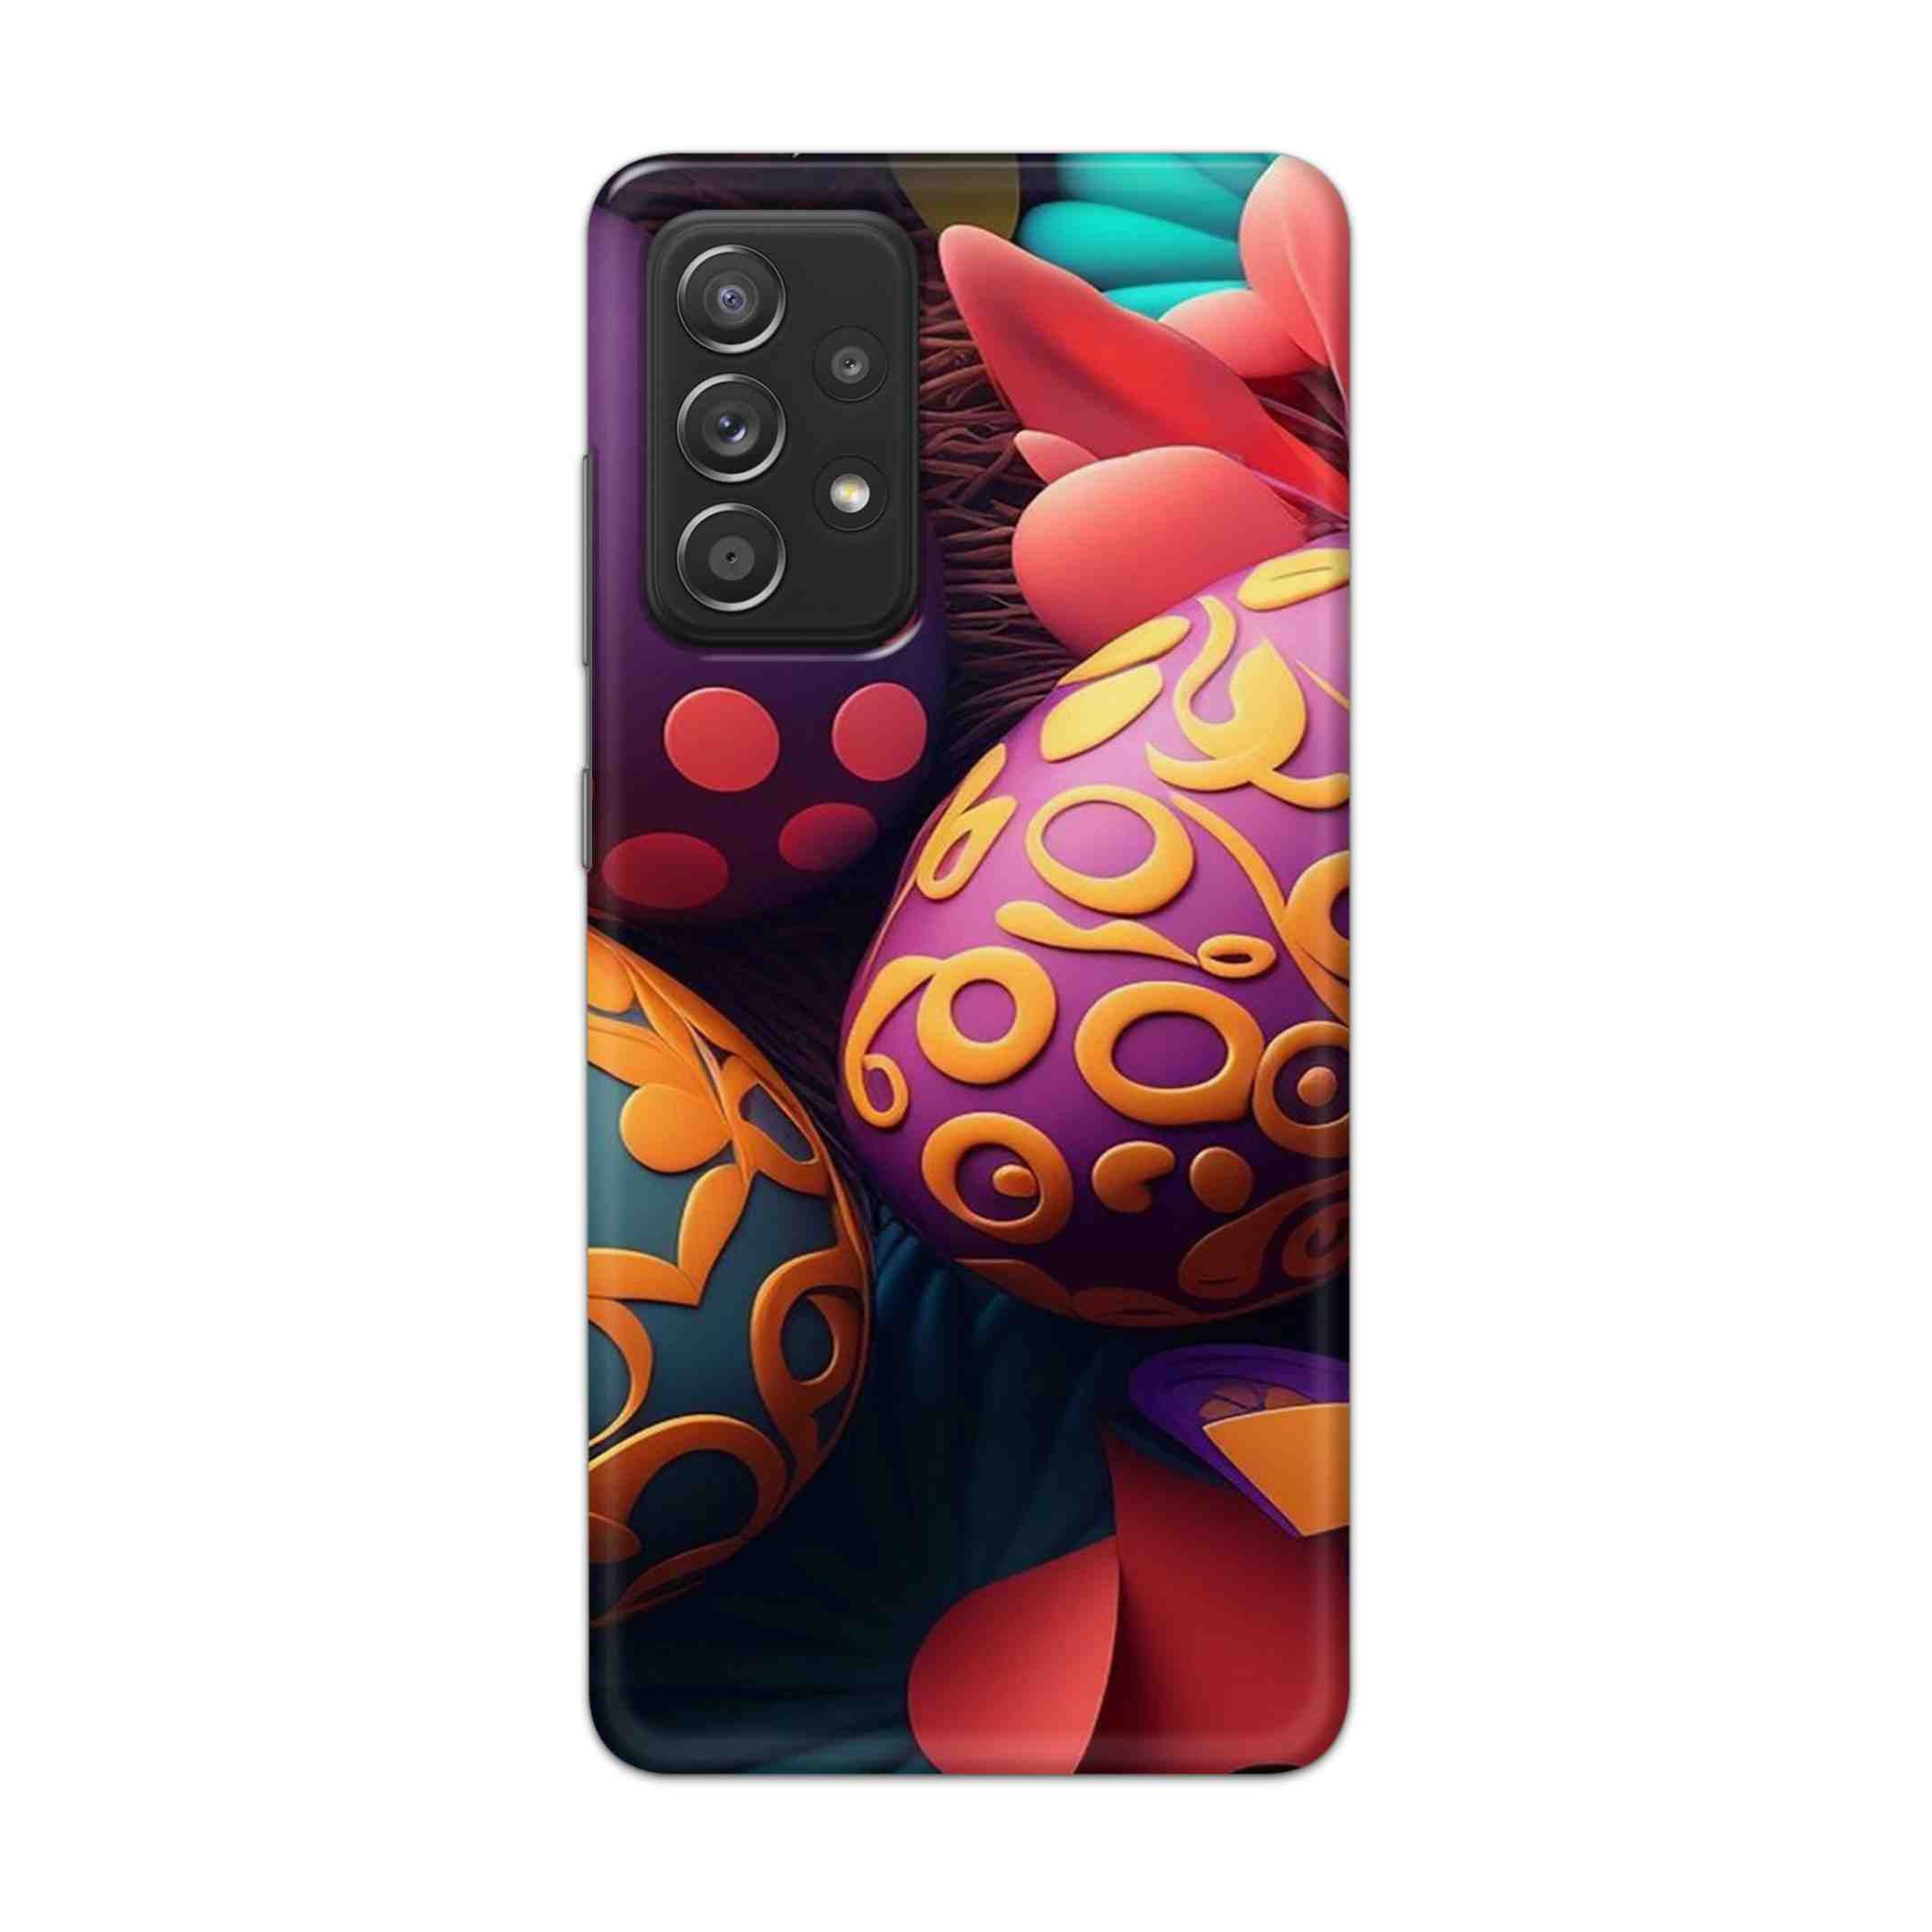 Buy Easter Egg Hard Back Mobile Phone Case Cover For Samsung Galaxy A52 Online